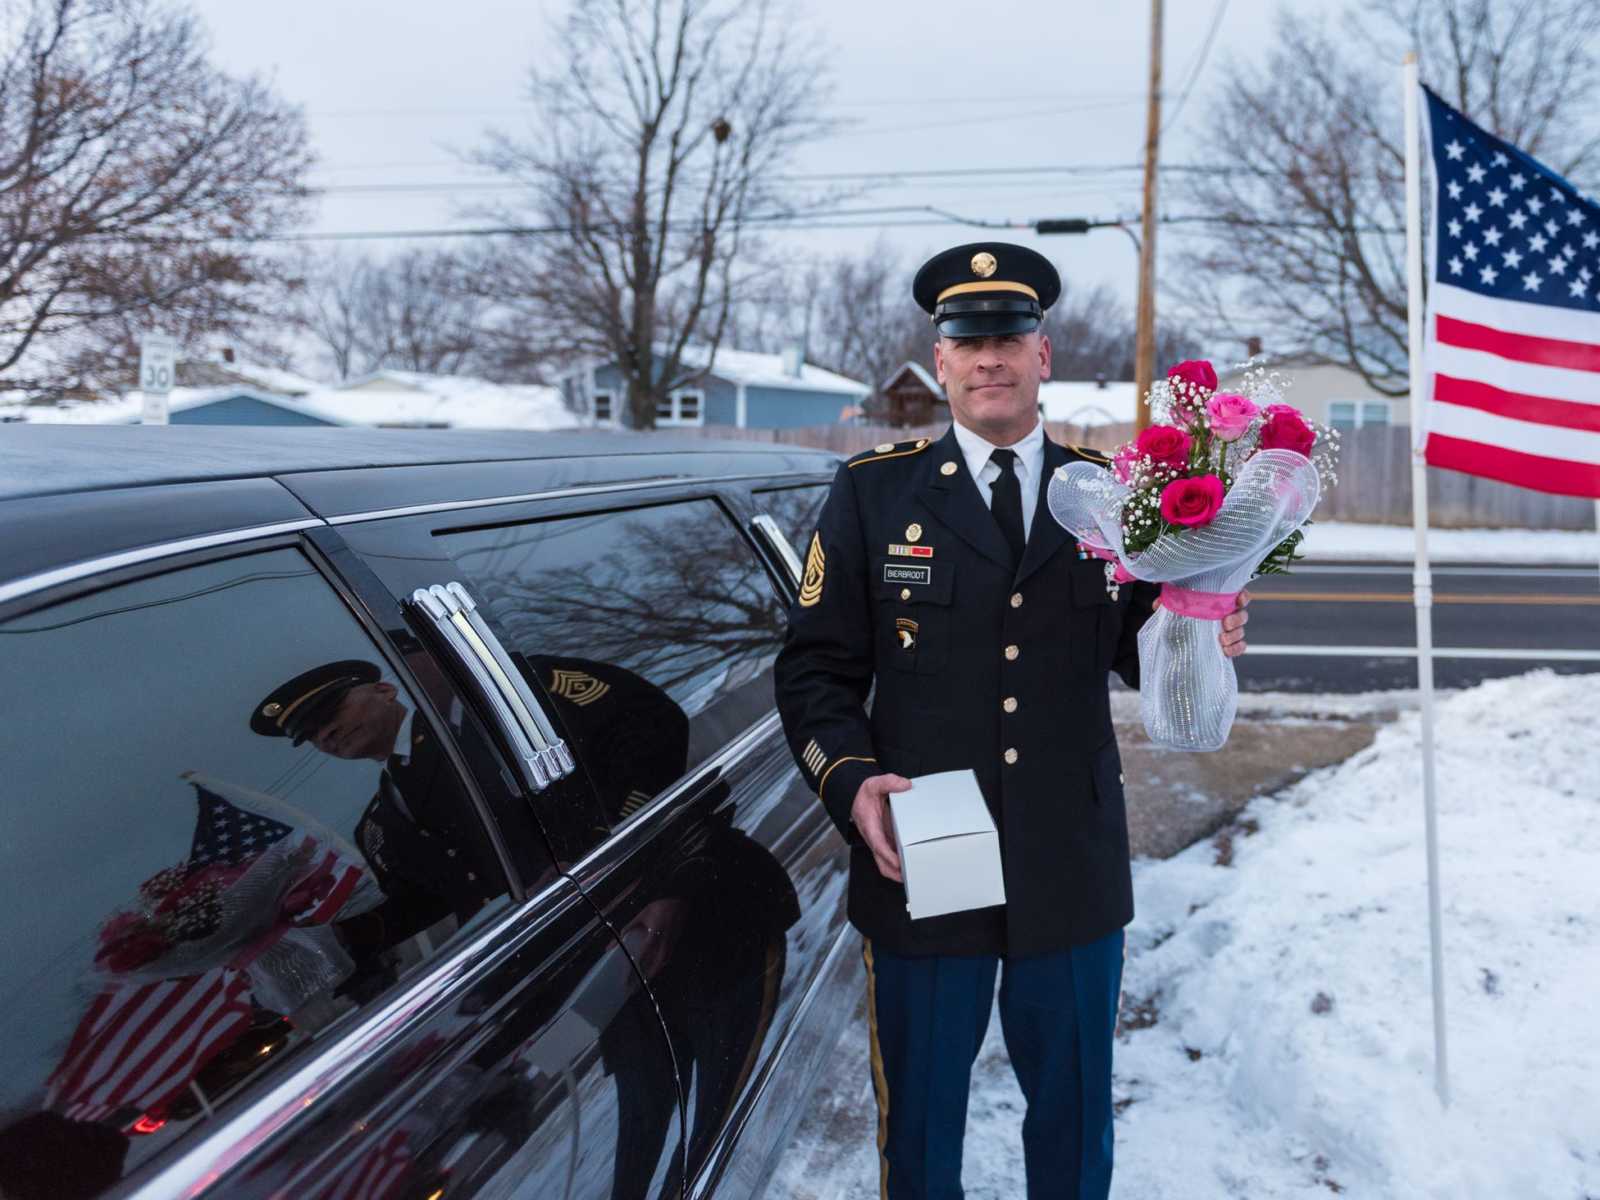 national guard soldier standing in snowy driveway next to limo and american flag holding bouquet of pink roses and white box